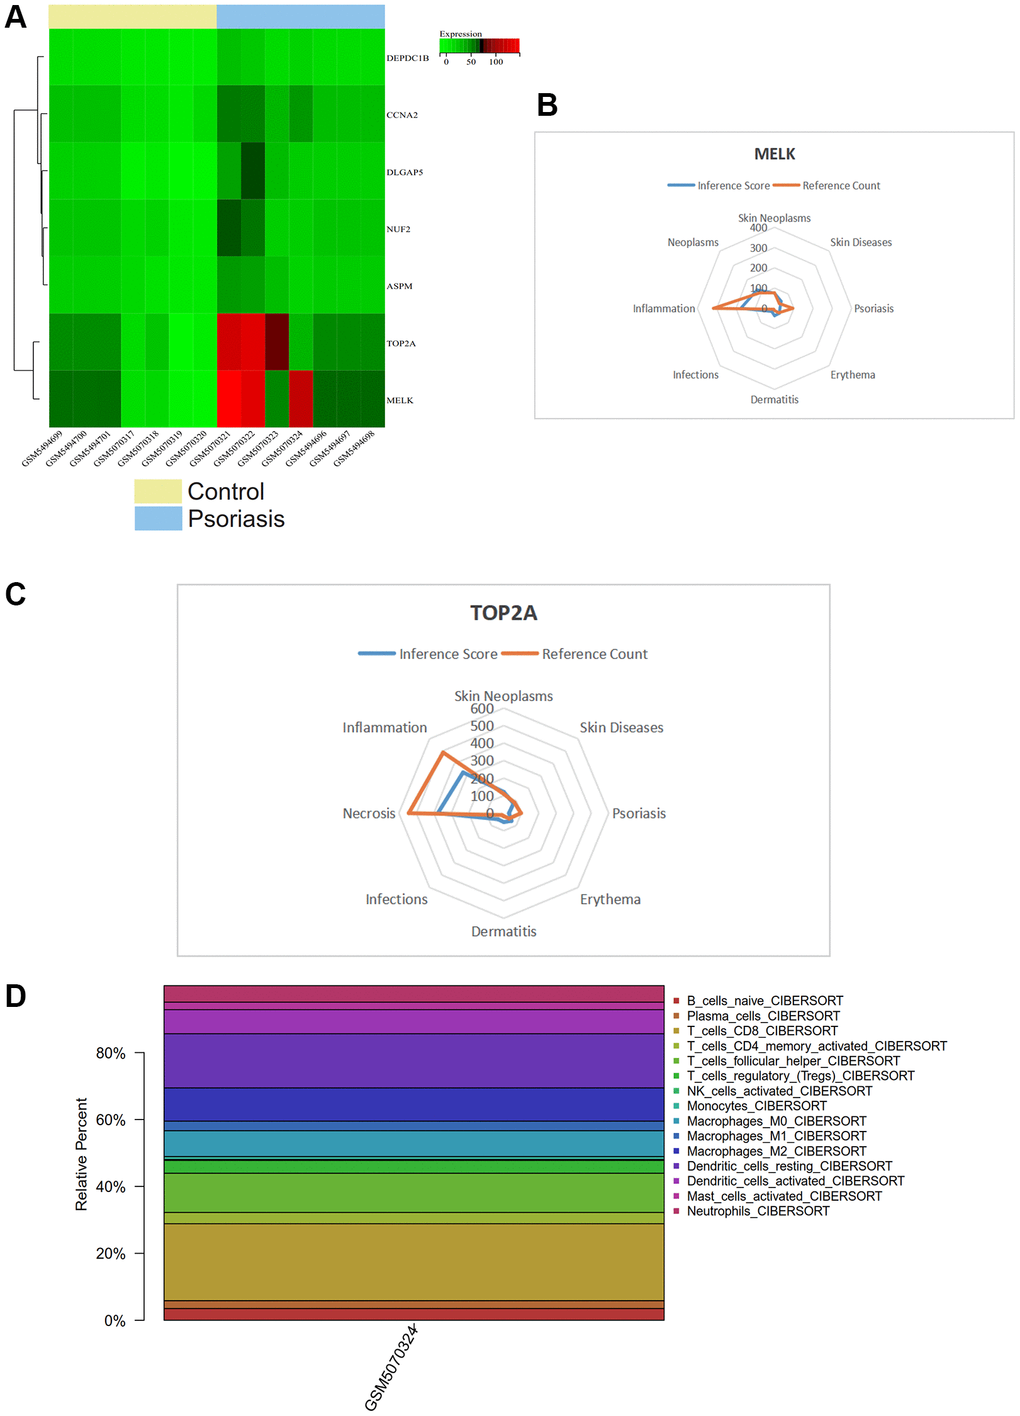 (A) Heatmap of gene expression levels. (B, C) CTD analysis related to TOP2A, MELK, and their association with skin tumors, skin diseases, psoriasis, erythema, dermatitis, and infection. (D) Immune infiltration analysis showing the proportion of immune cells in the whole gene expression matrix.